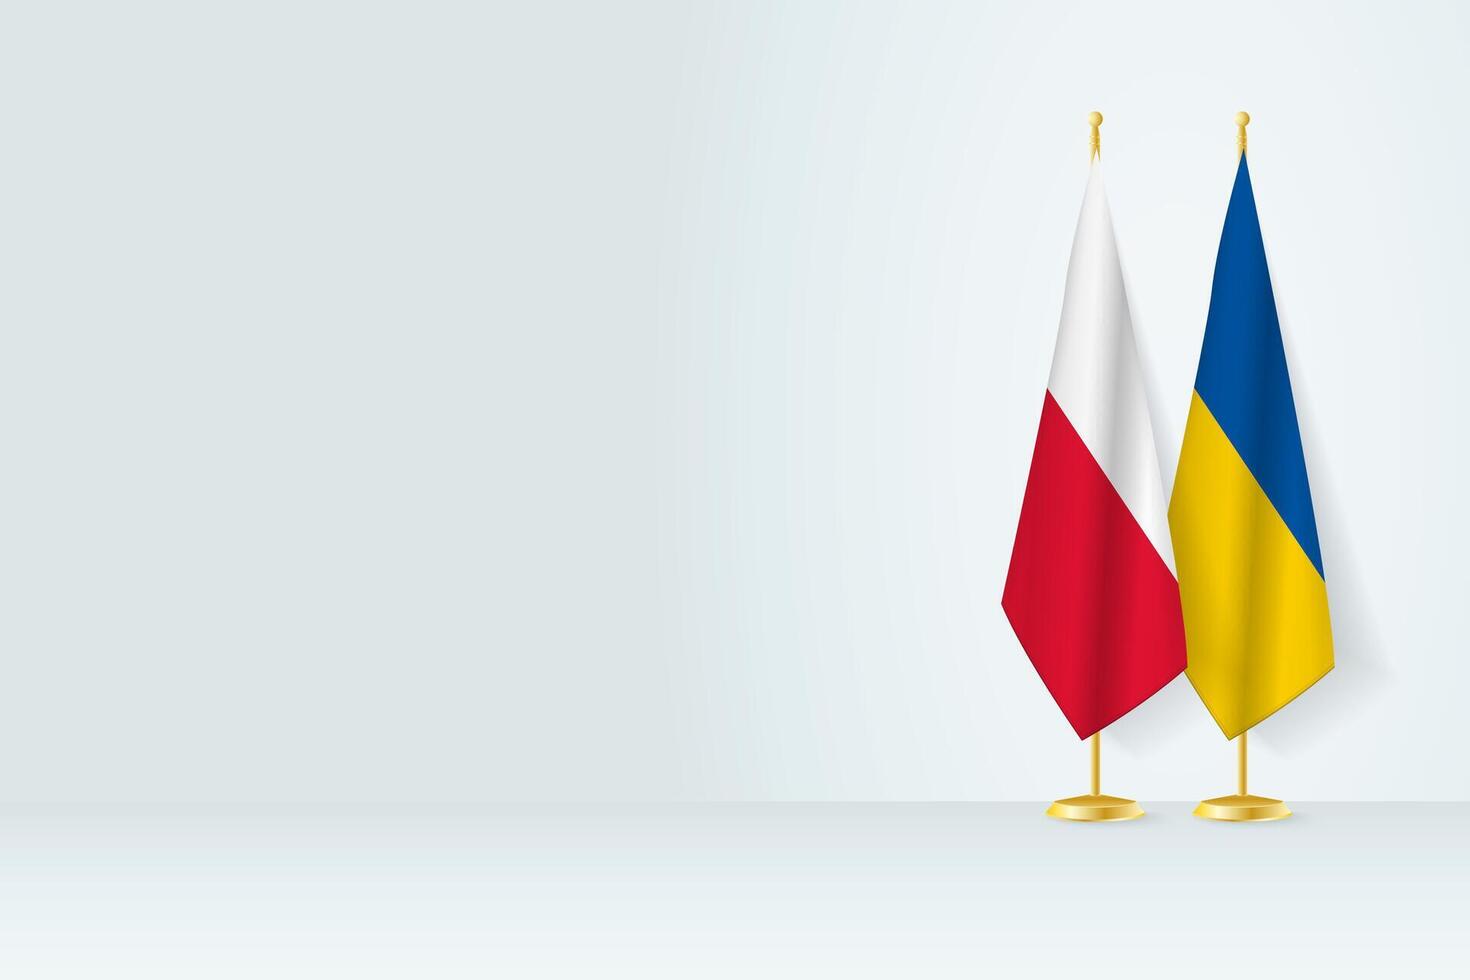 Flags of Poland and Ukraine on flag stand, meeting between two countries. vector